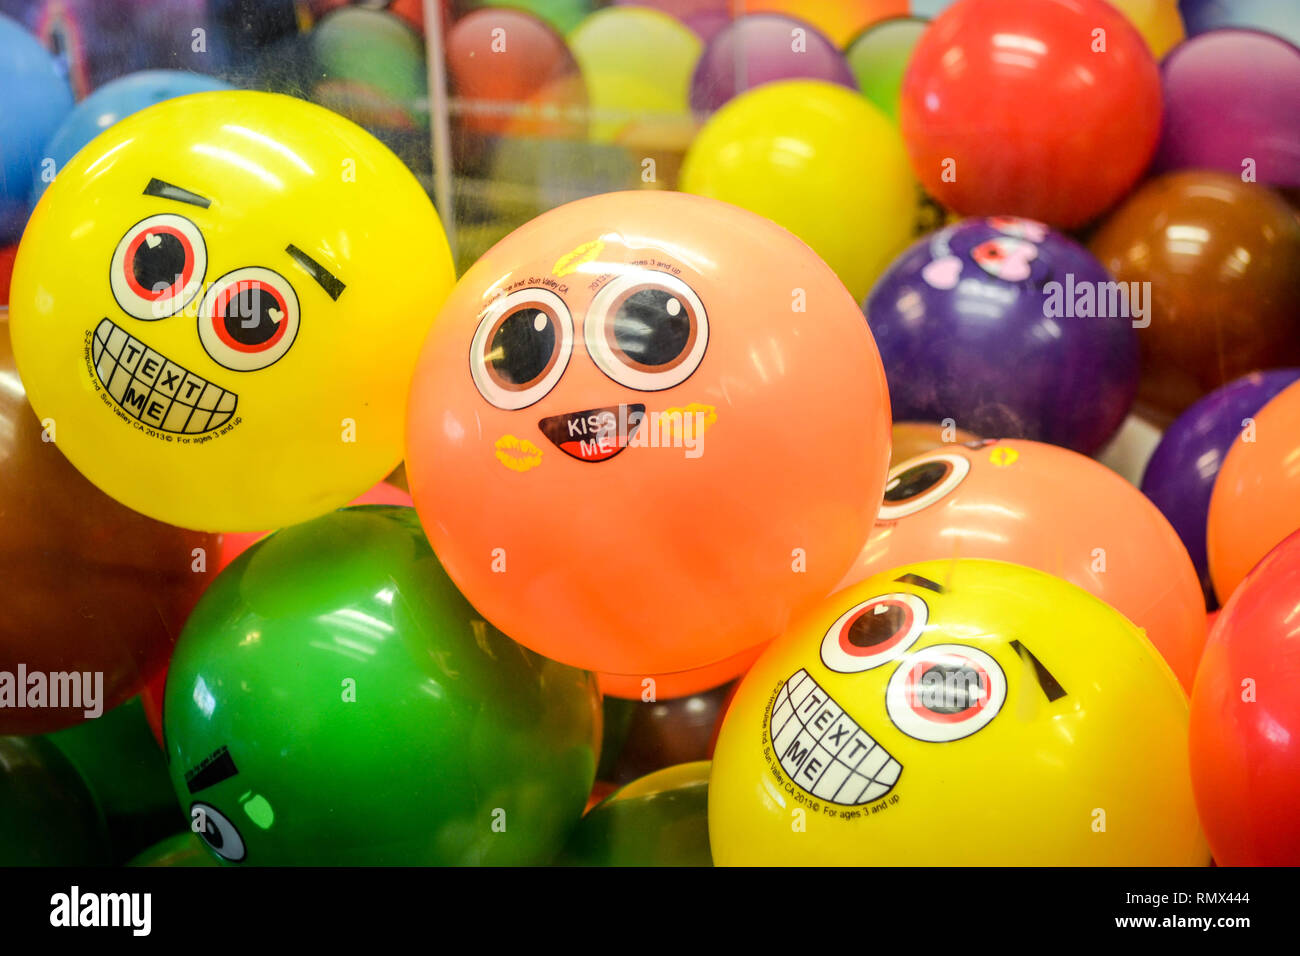 Emoji toy balls with texting messages in a vending machine in Twentynine Palms, California, USA Stock Photo